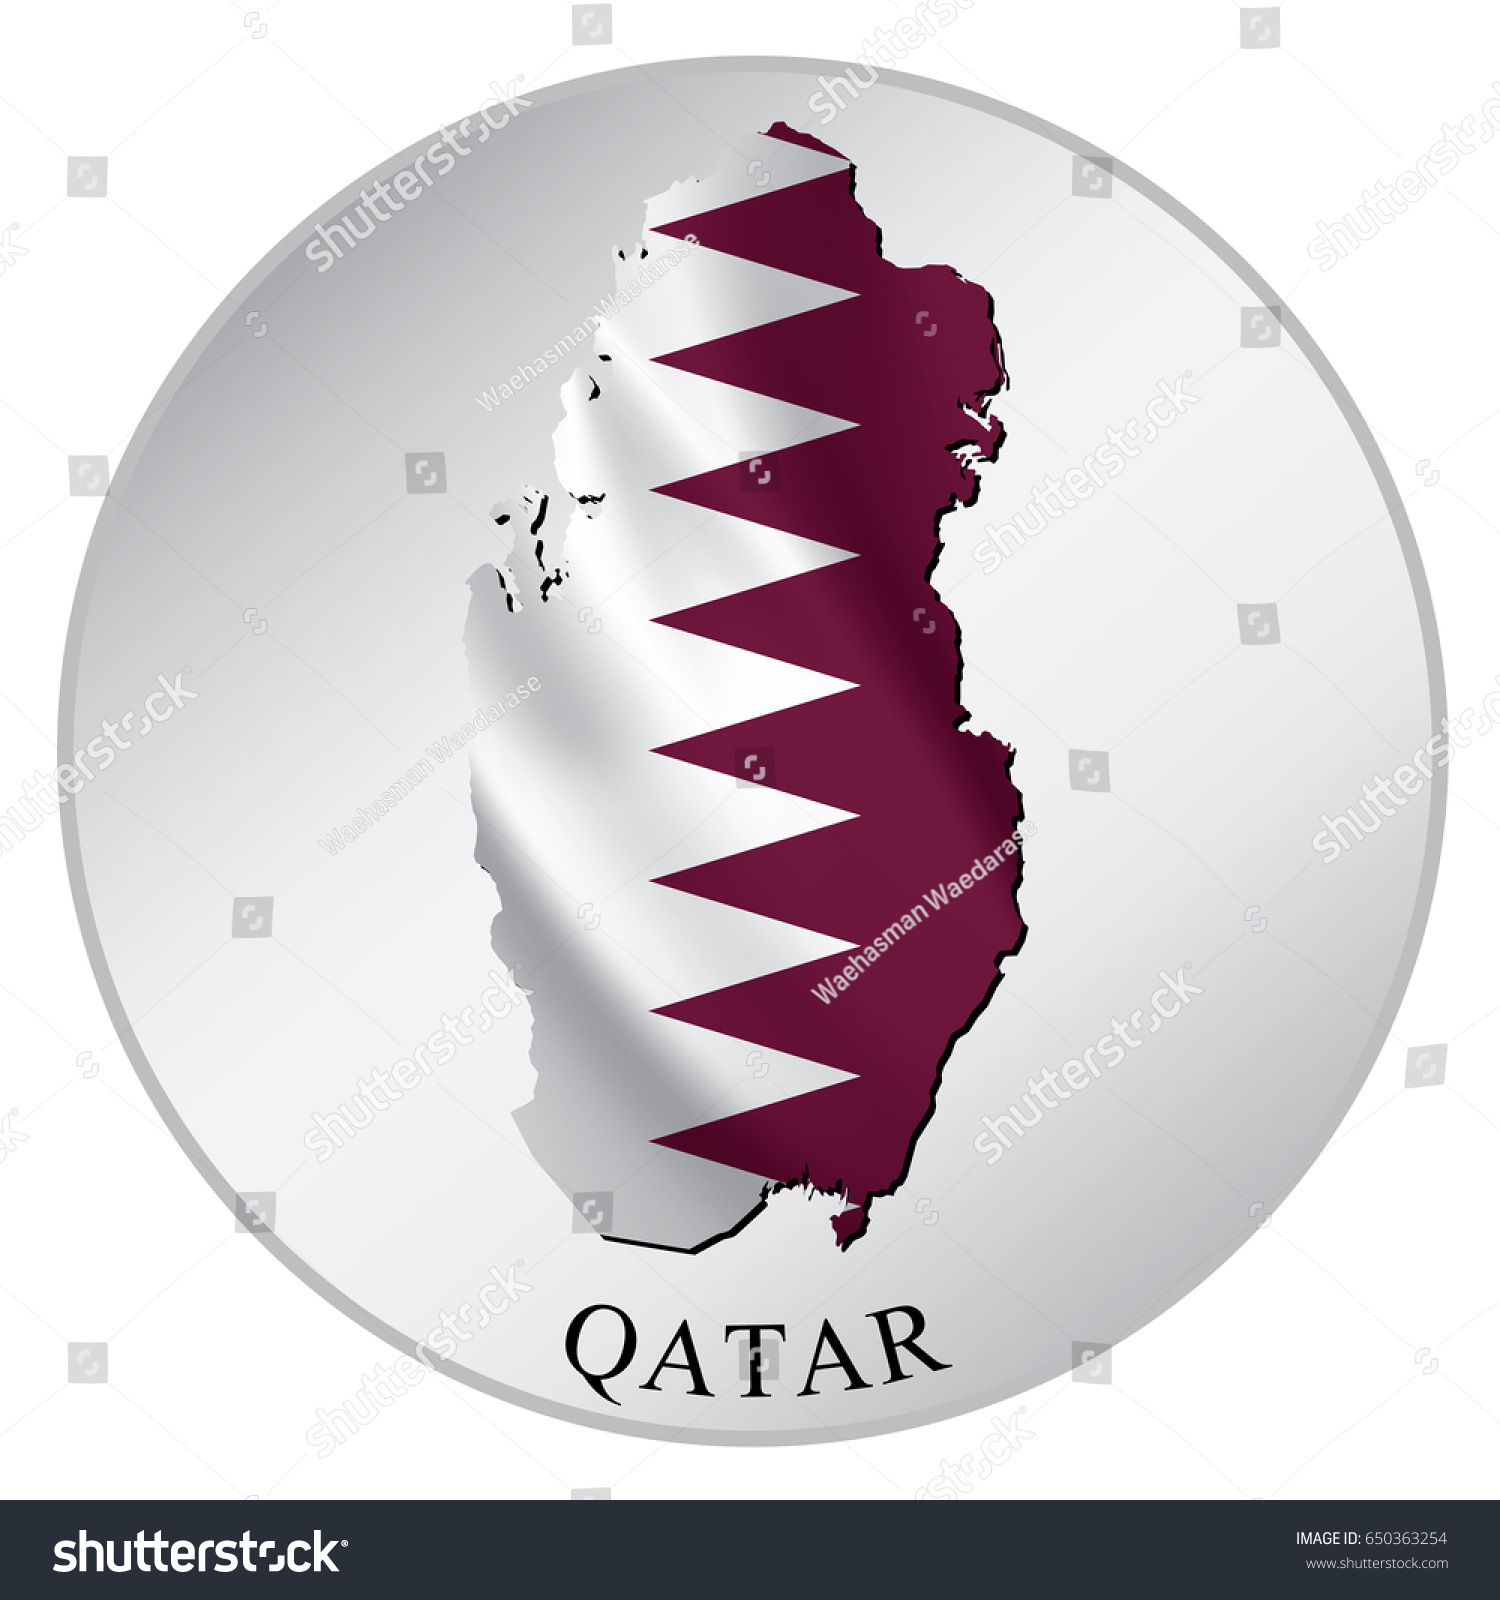 Image result for qatar name poster